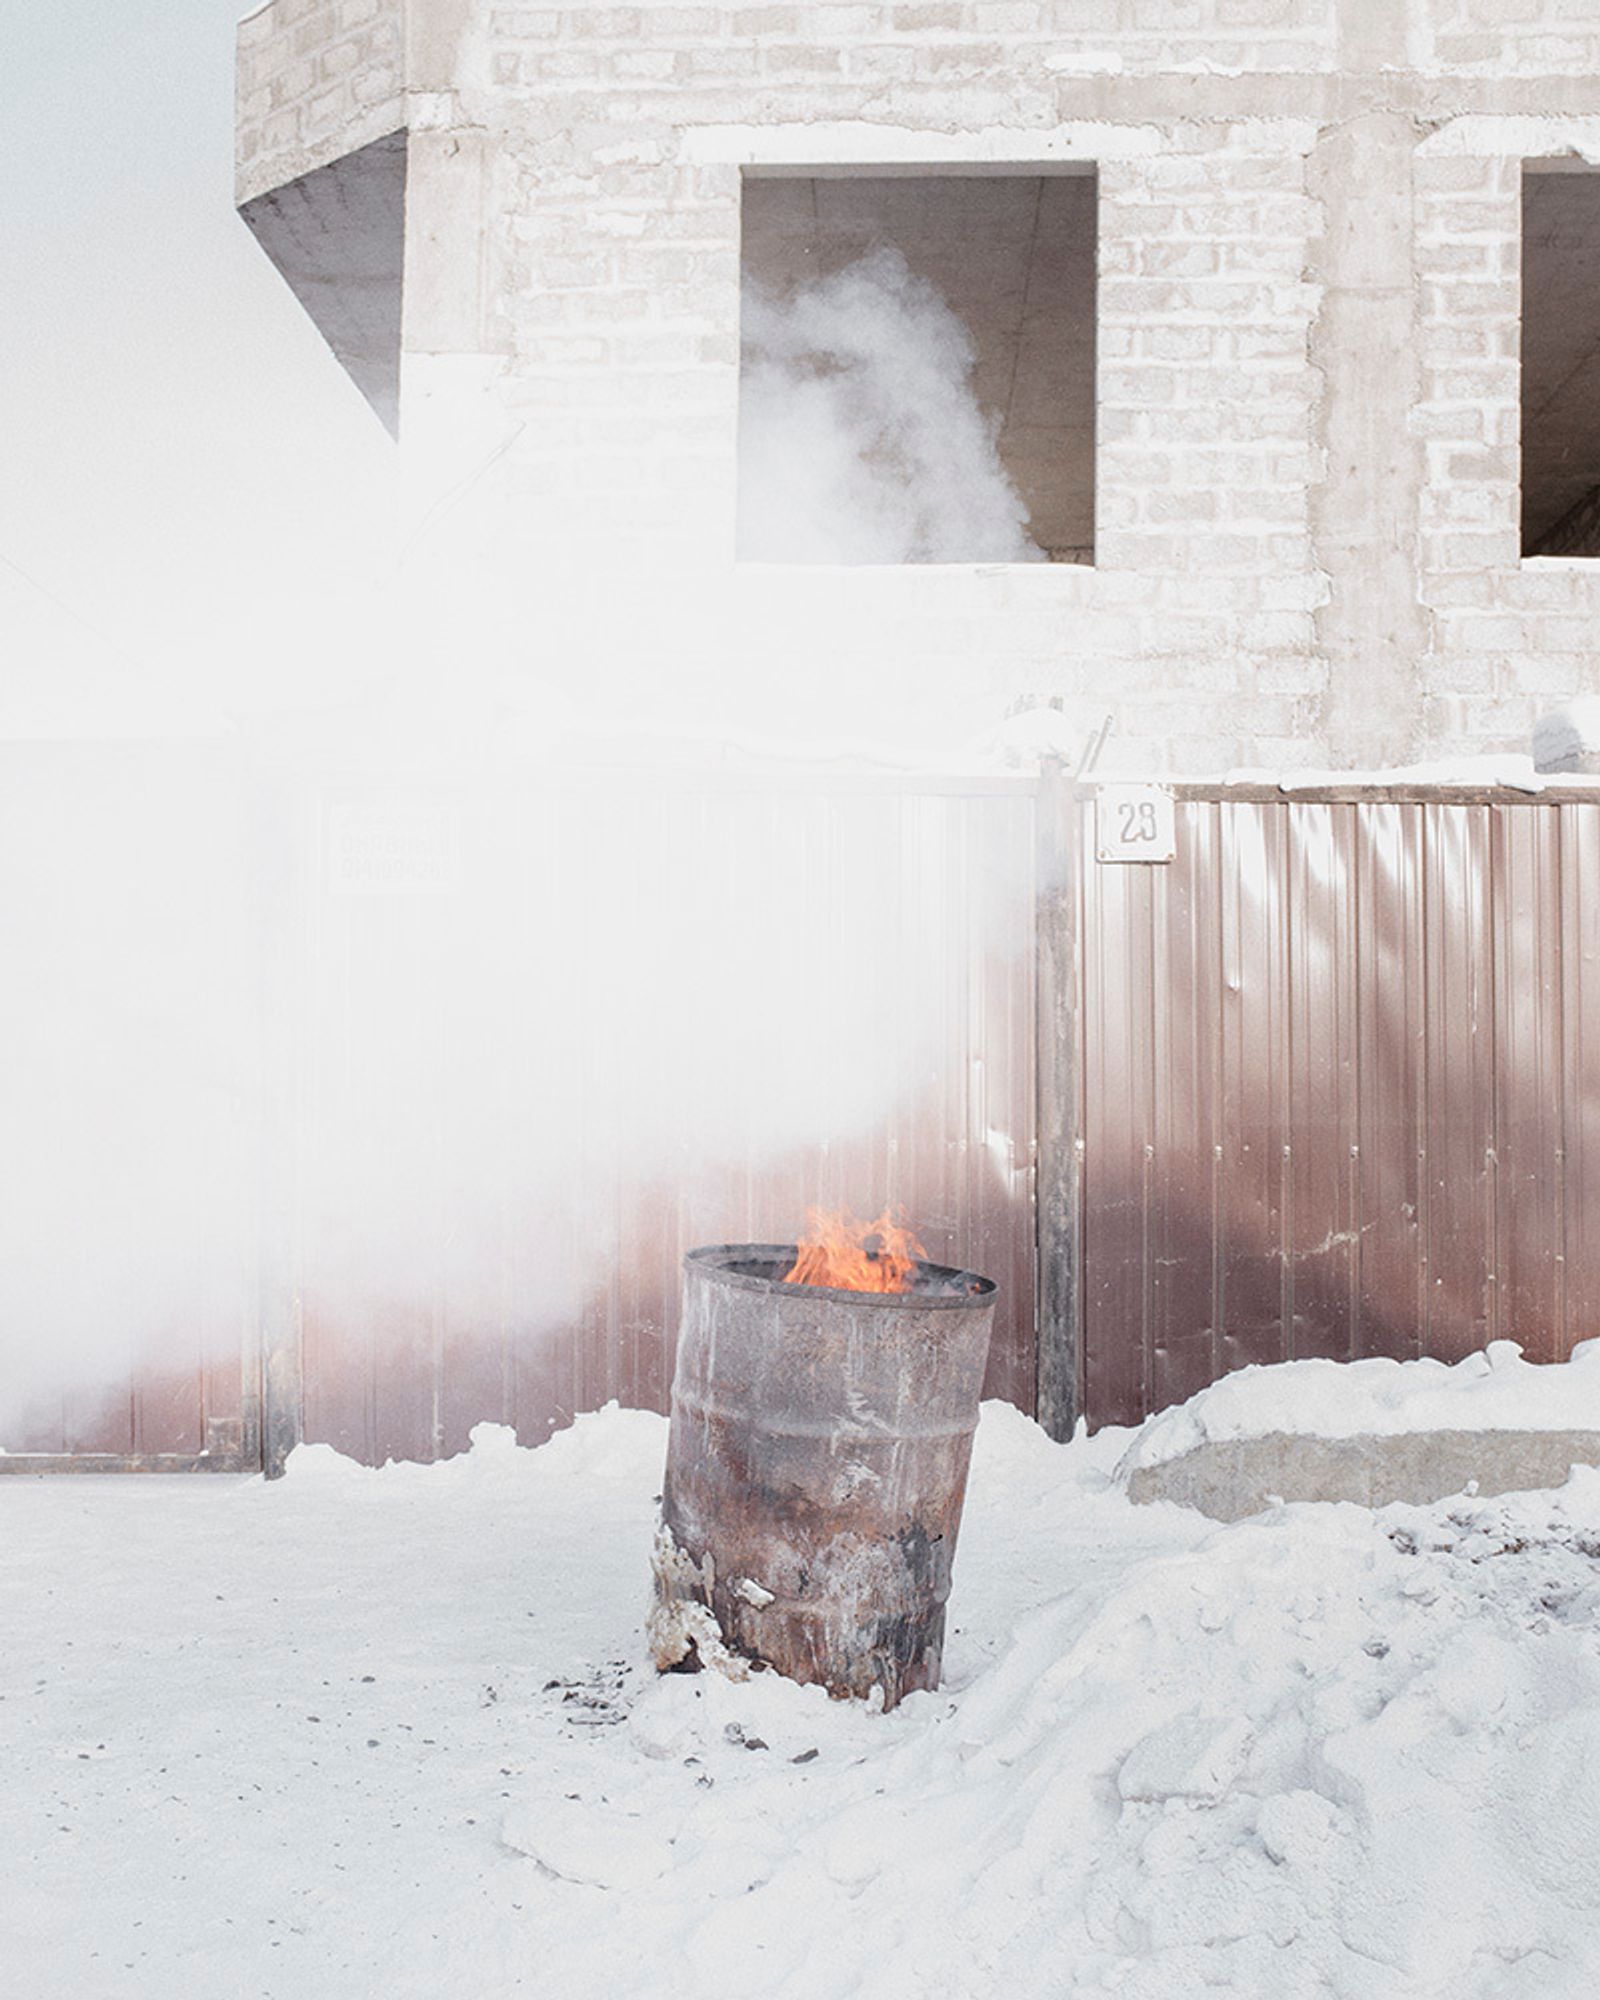 Exploring Russian Stereotypes in the World’s Coldest City